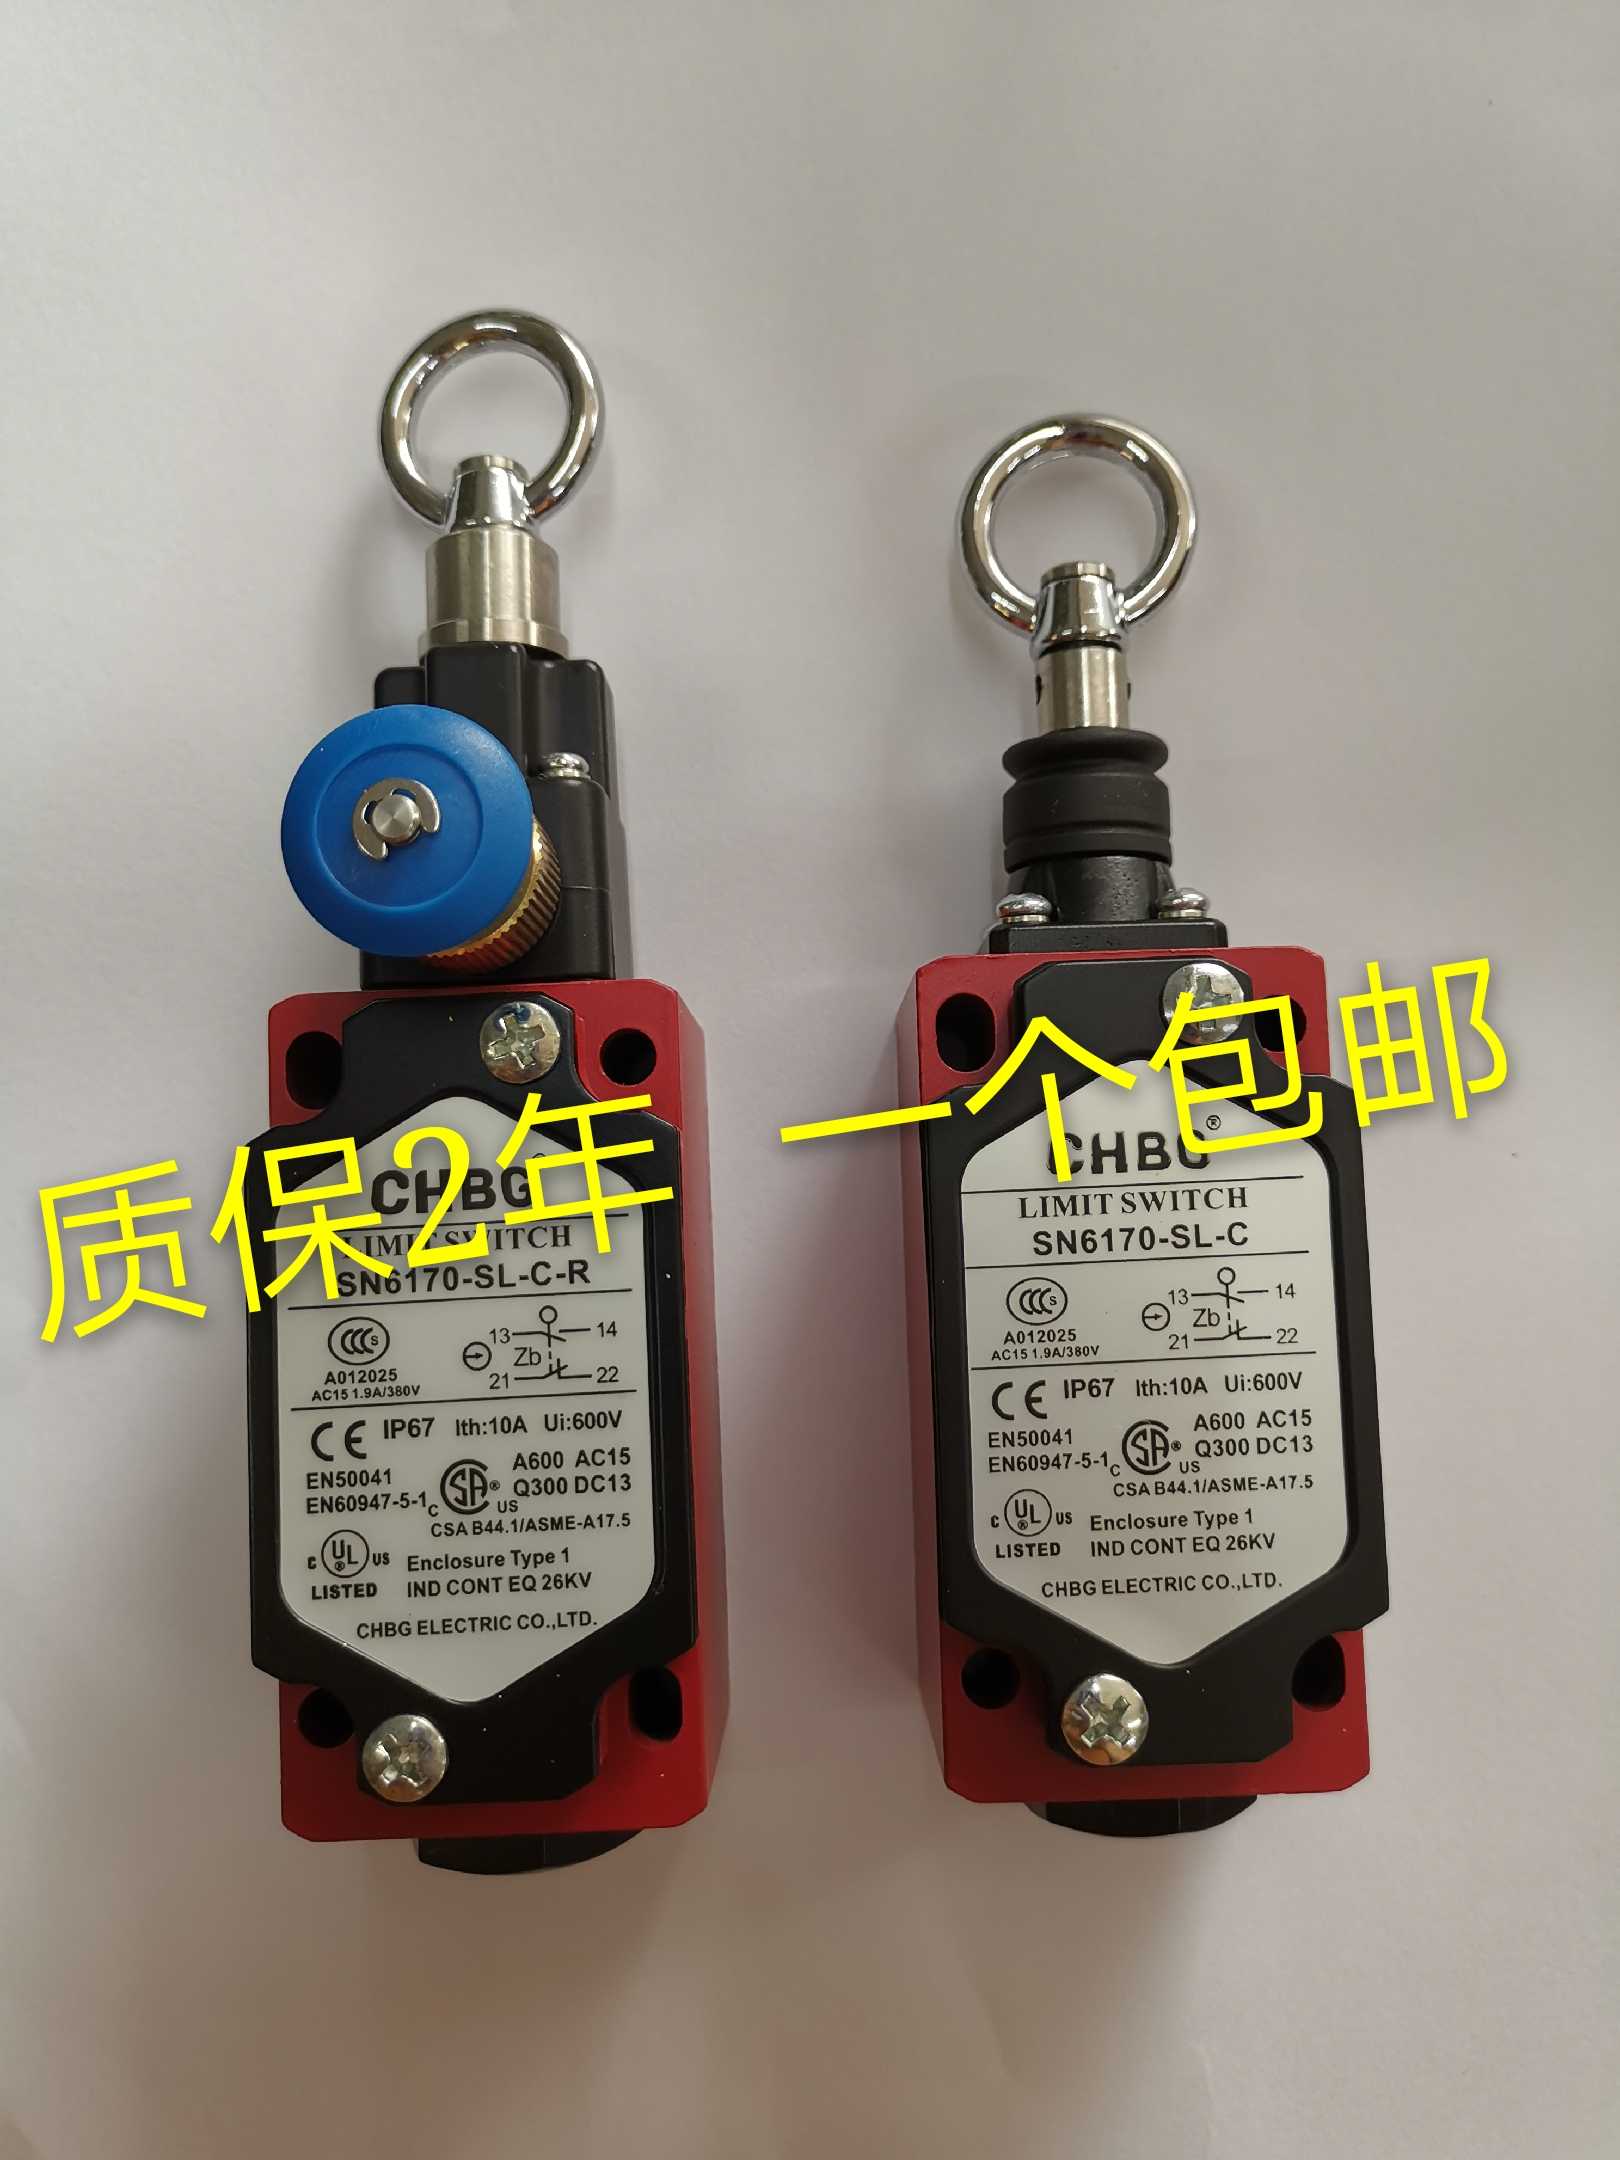 Safety rope switch sn2170 / sn4170 / sn6170-sl-c-r emergency stop cable limit switch